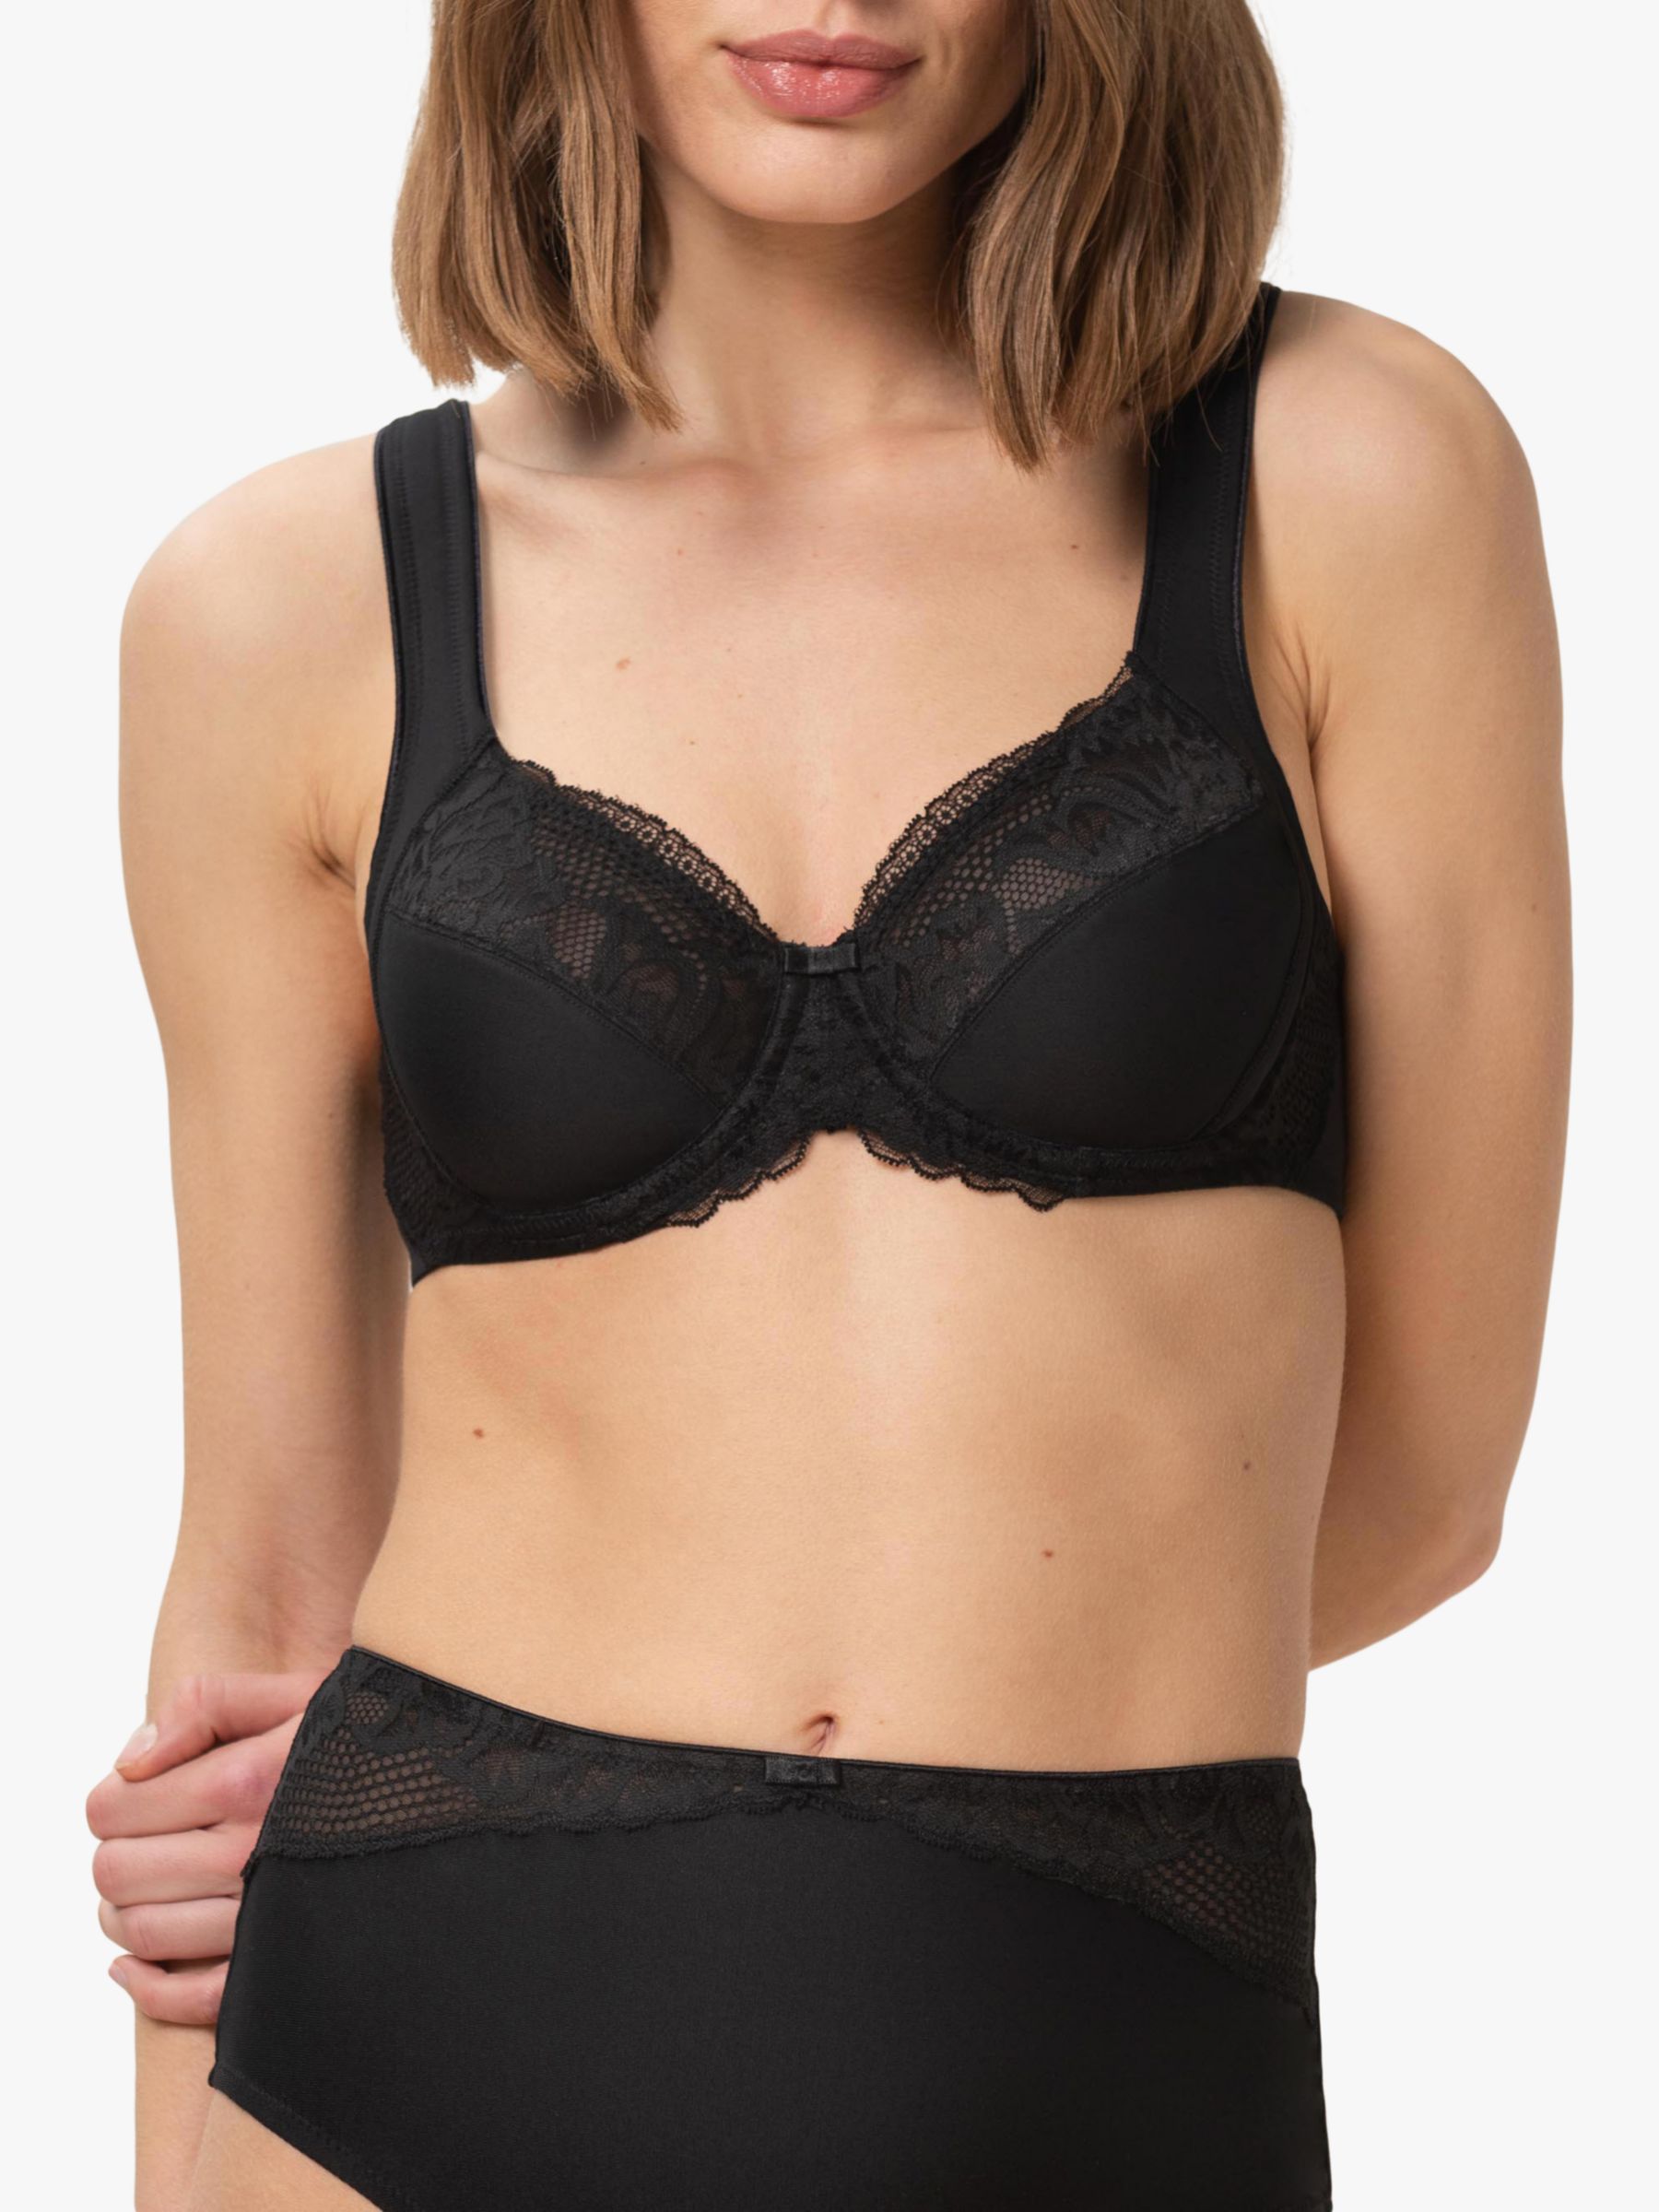 Triumph Modern Lace & Cotton Full Cup Bra, White at John Lewis & Partners